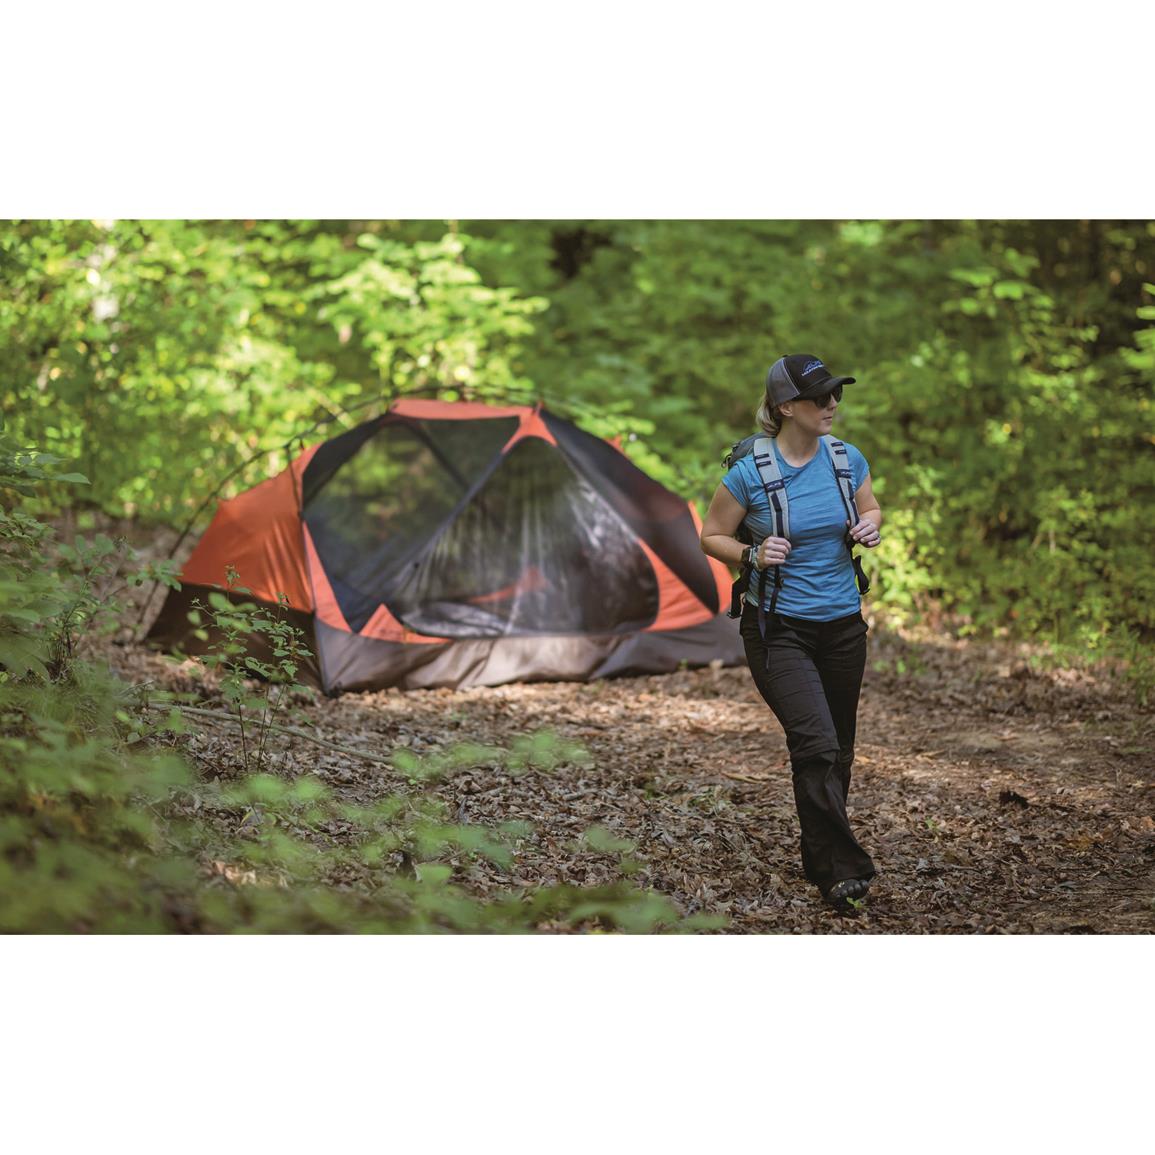 ALPS Mountaineering Chaos 2Person Tent 709583